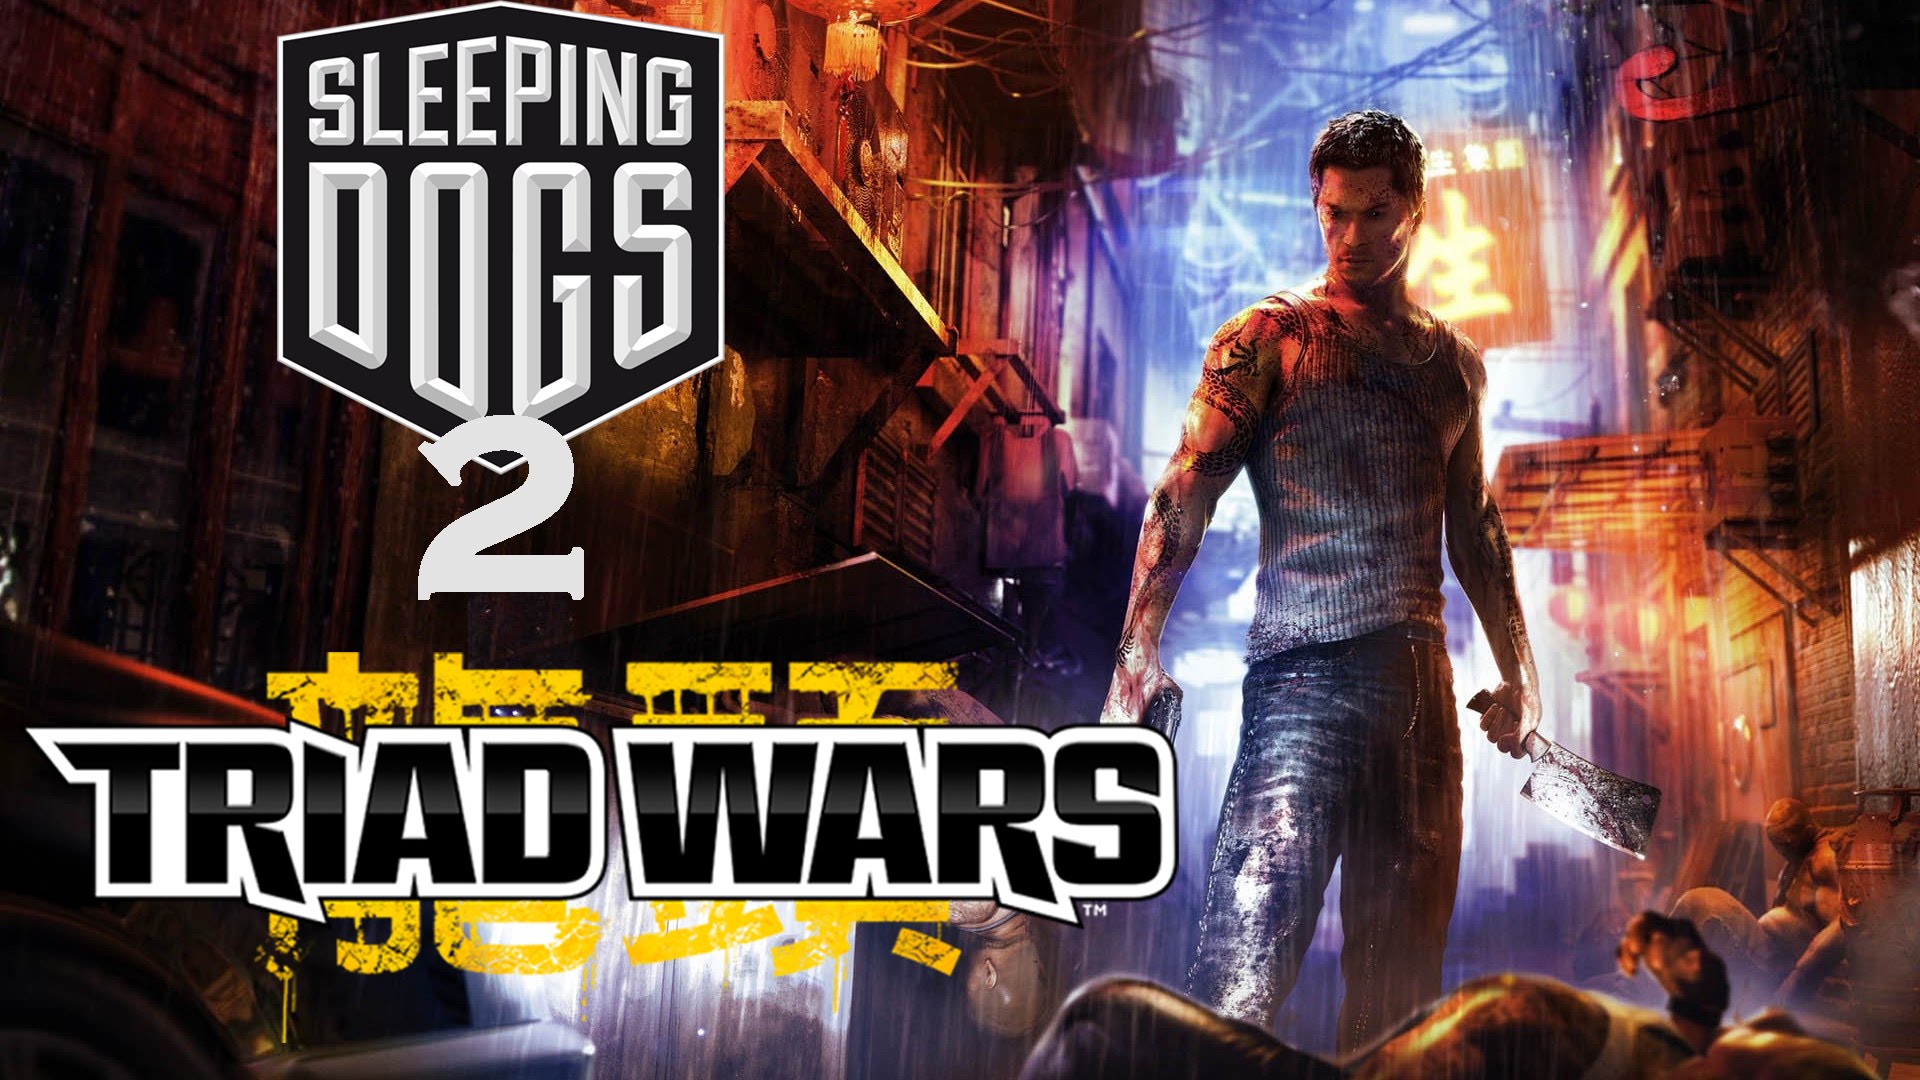 Triad Wars Sleeping Dogs United Front Games